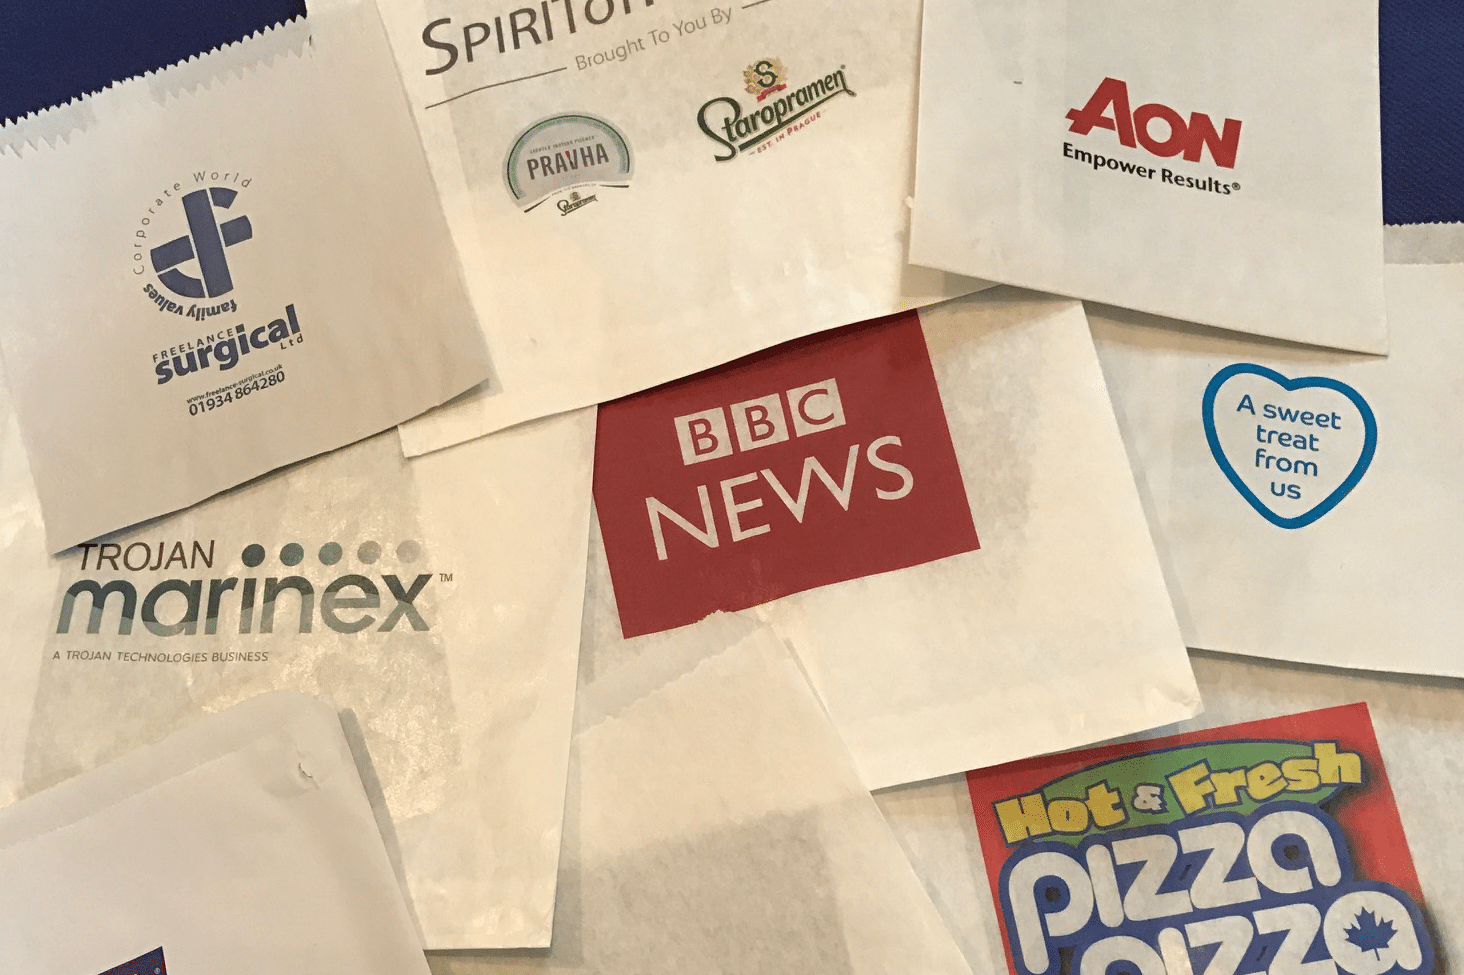 Customisable napkins such as BBC News and Pizza Pizza